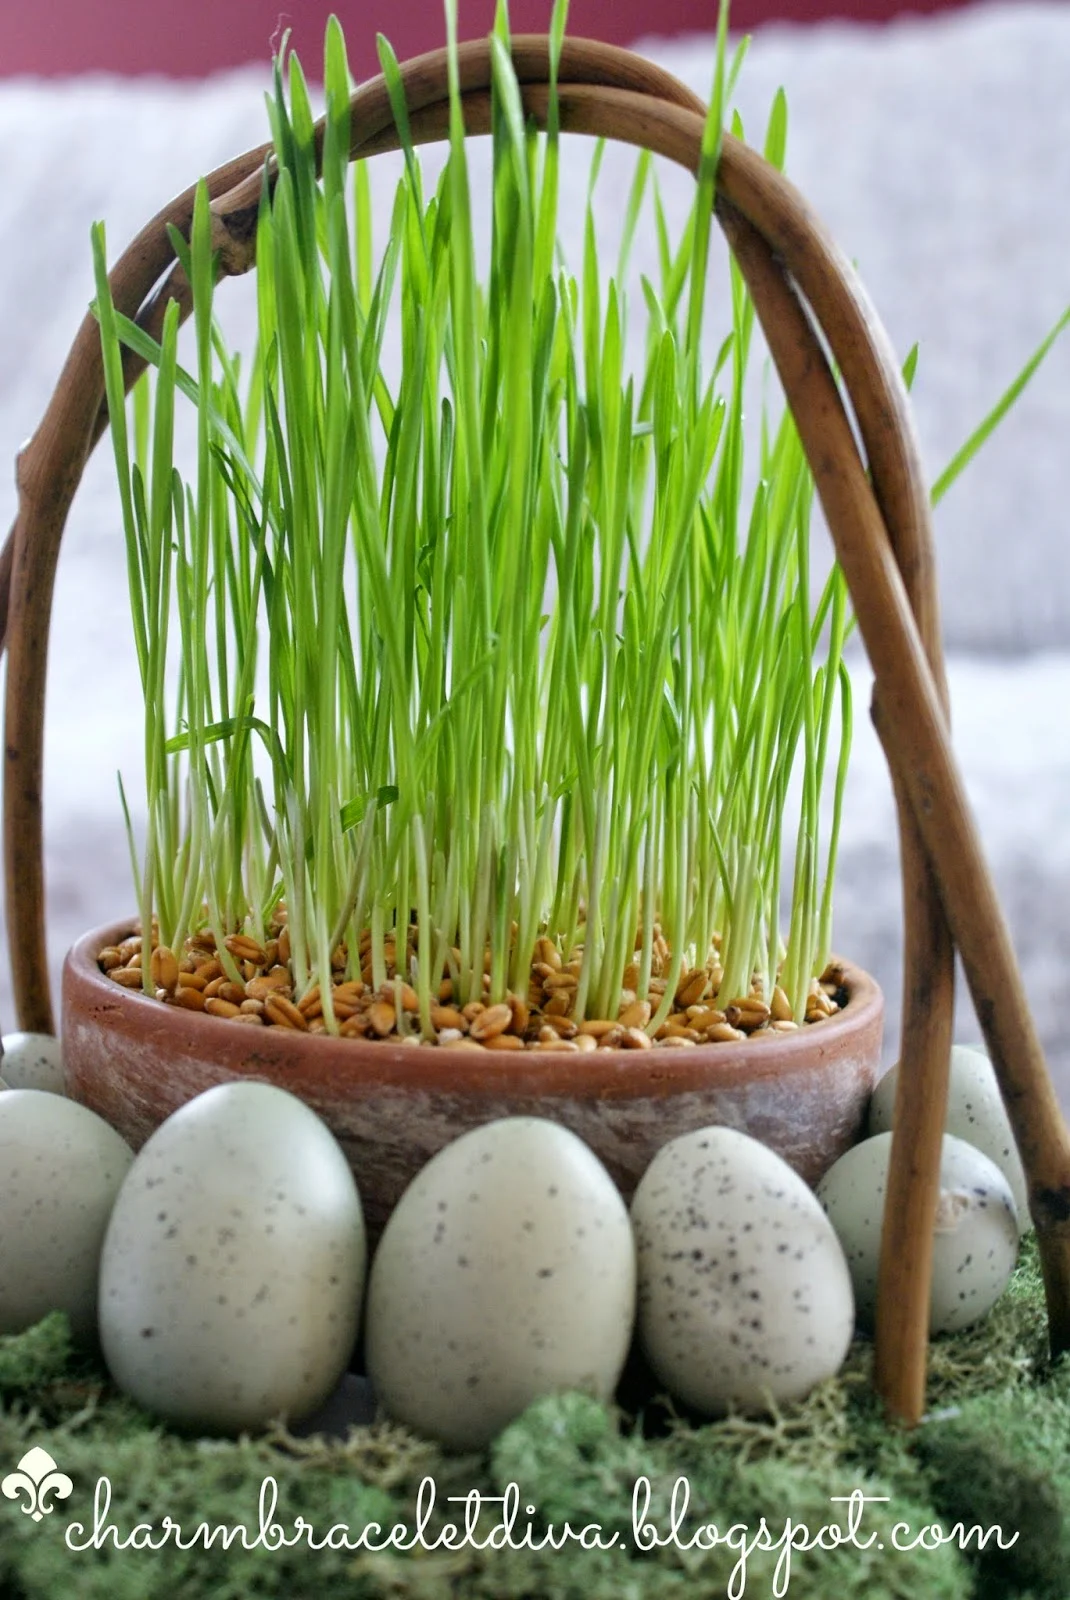 mossy Easter basket filled with wheat grass and robin's eggs